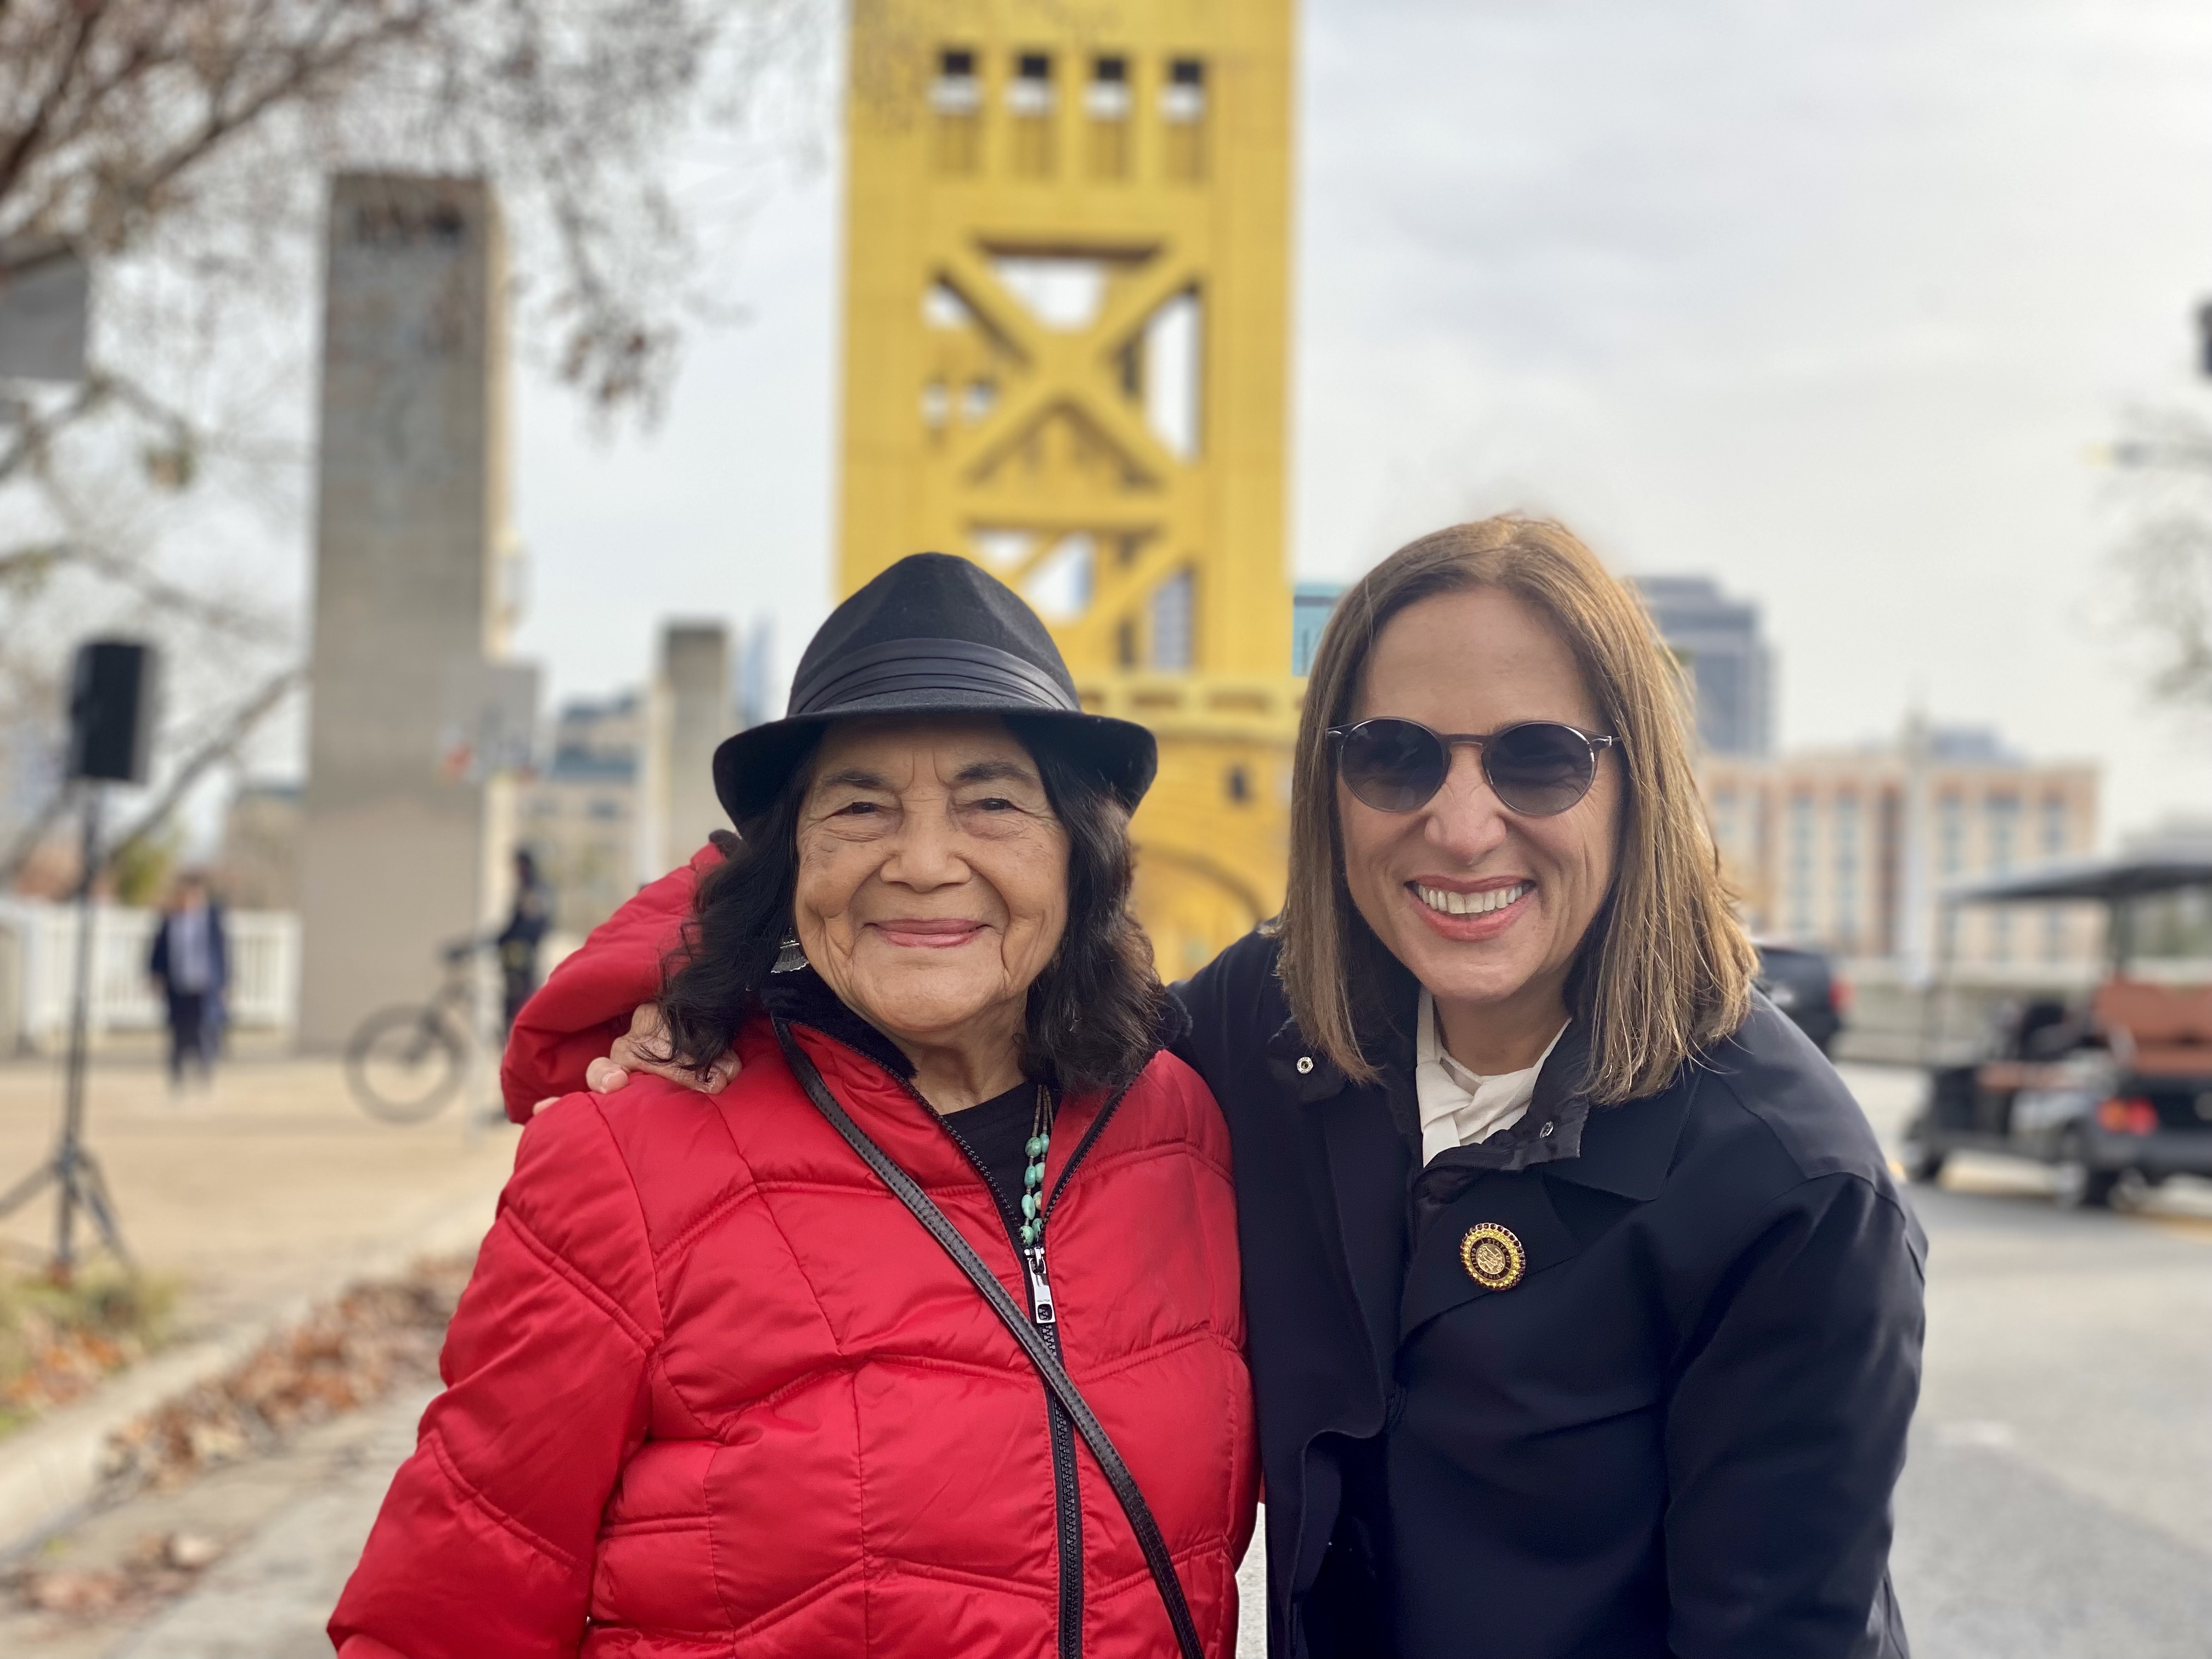 Image of Lt. Governor with Dolores Huerta in Sacramento